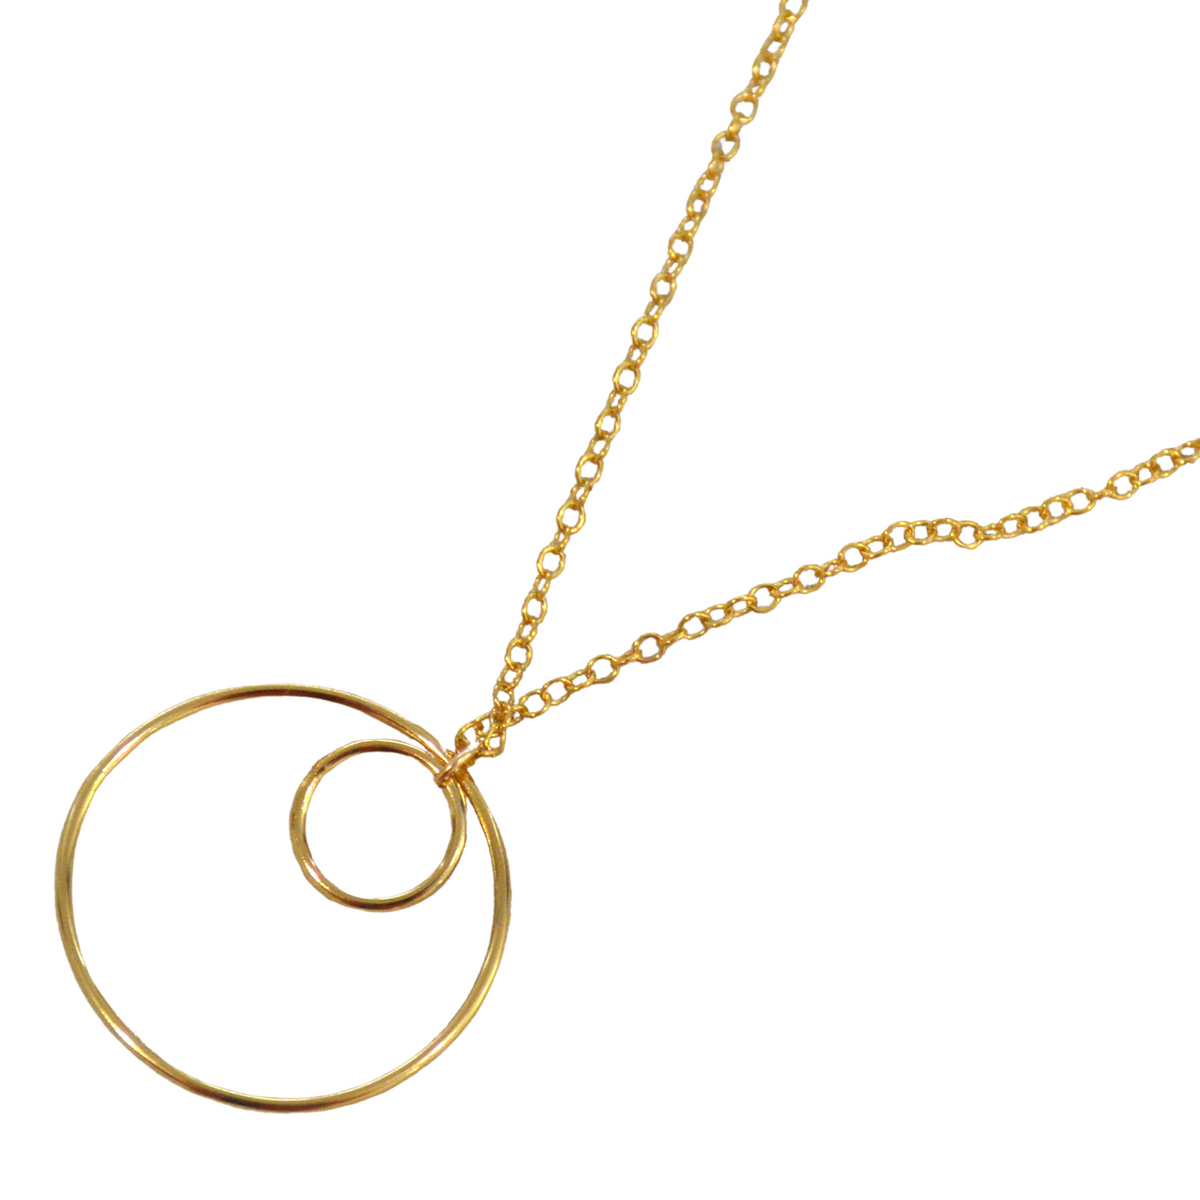 Solarius Double Ring 14k Gold or Sterling Silver Necklace